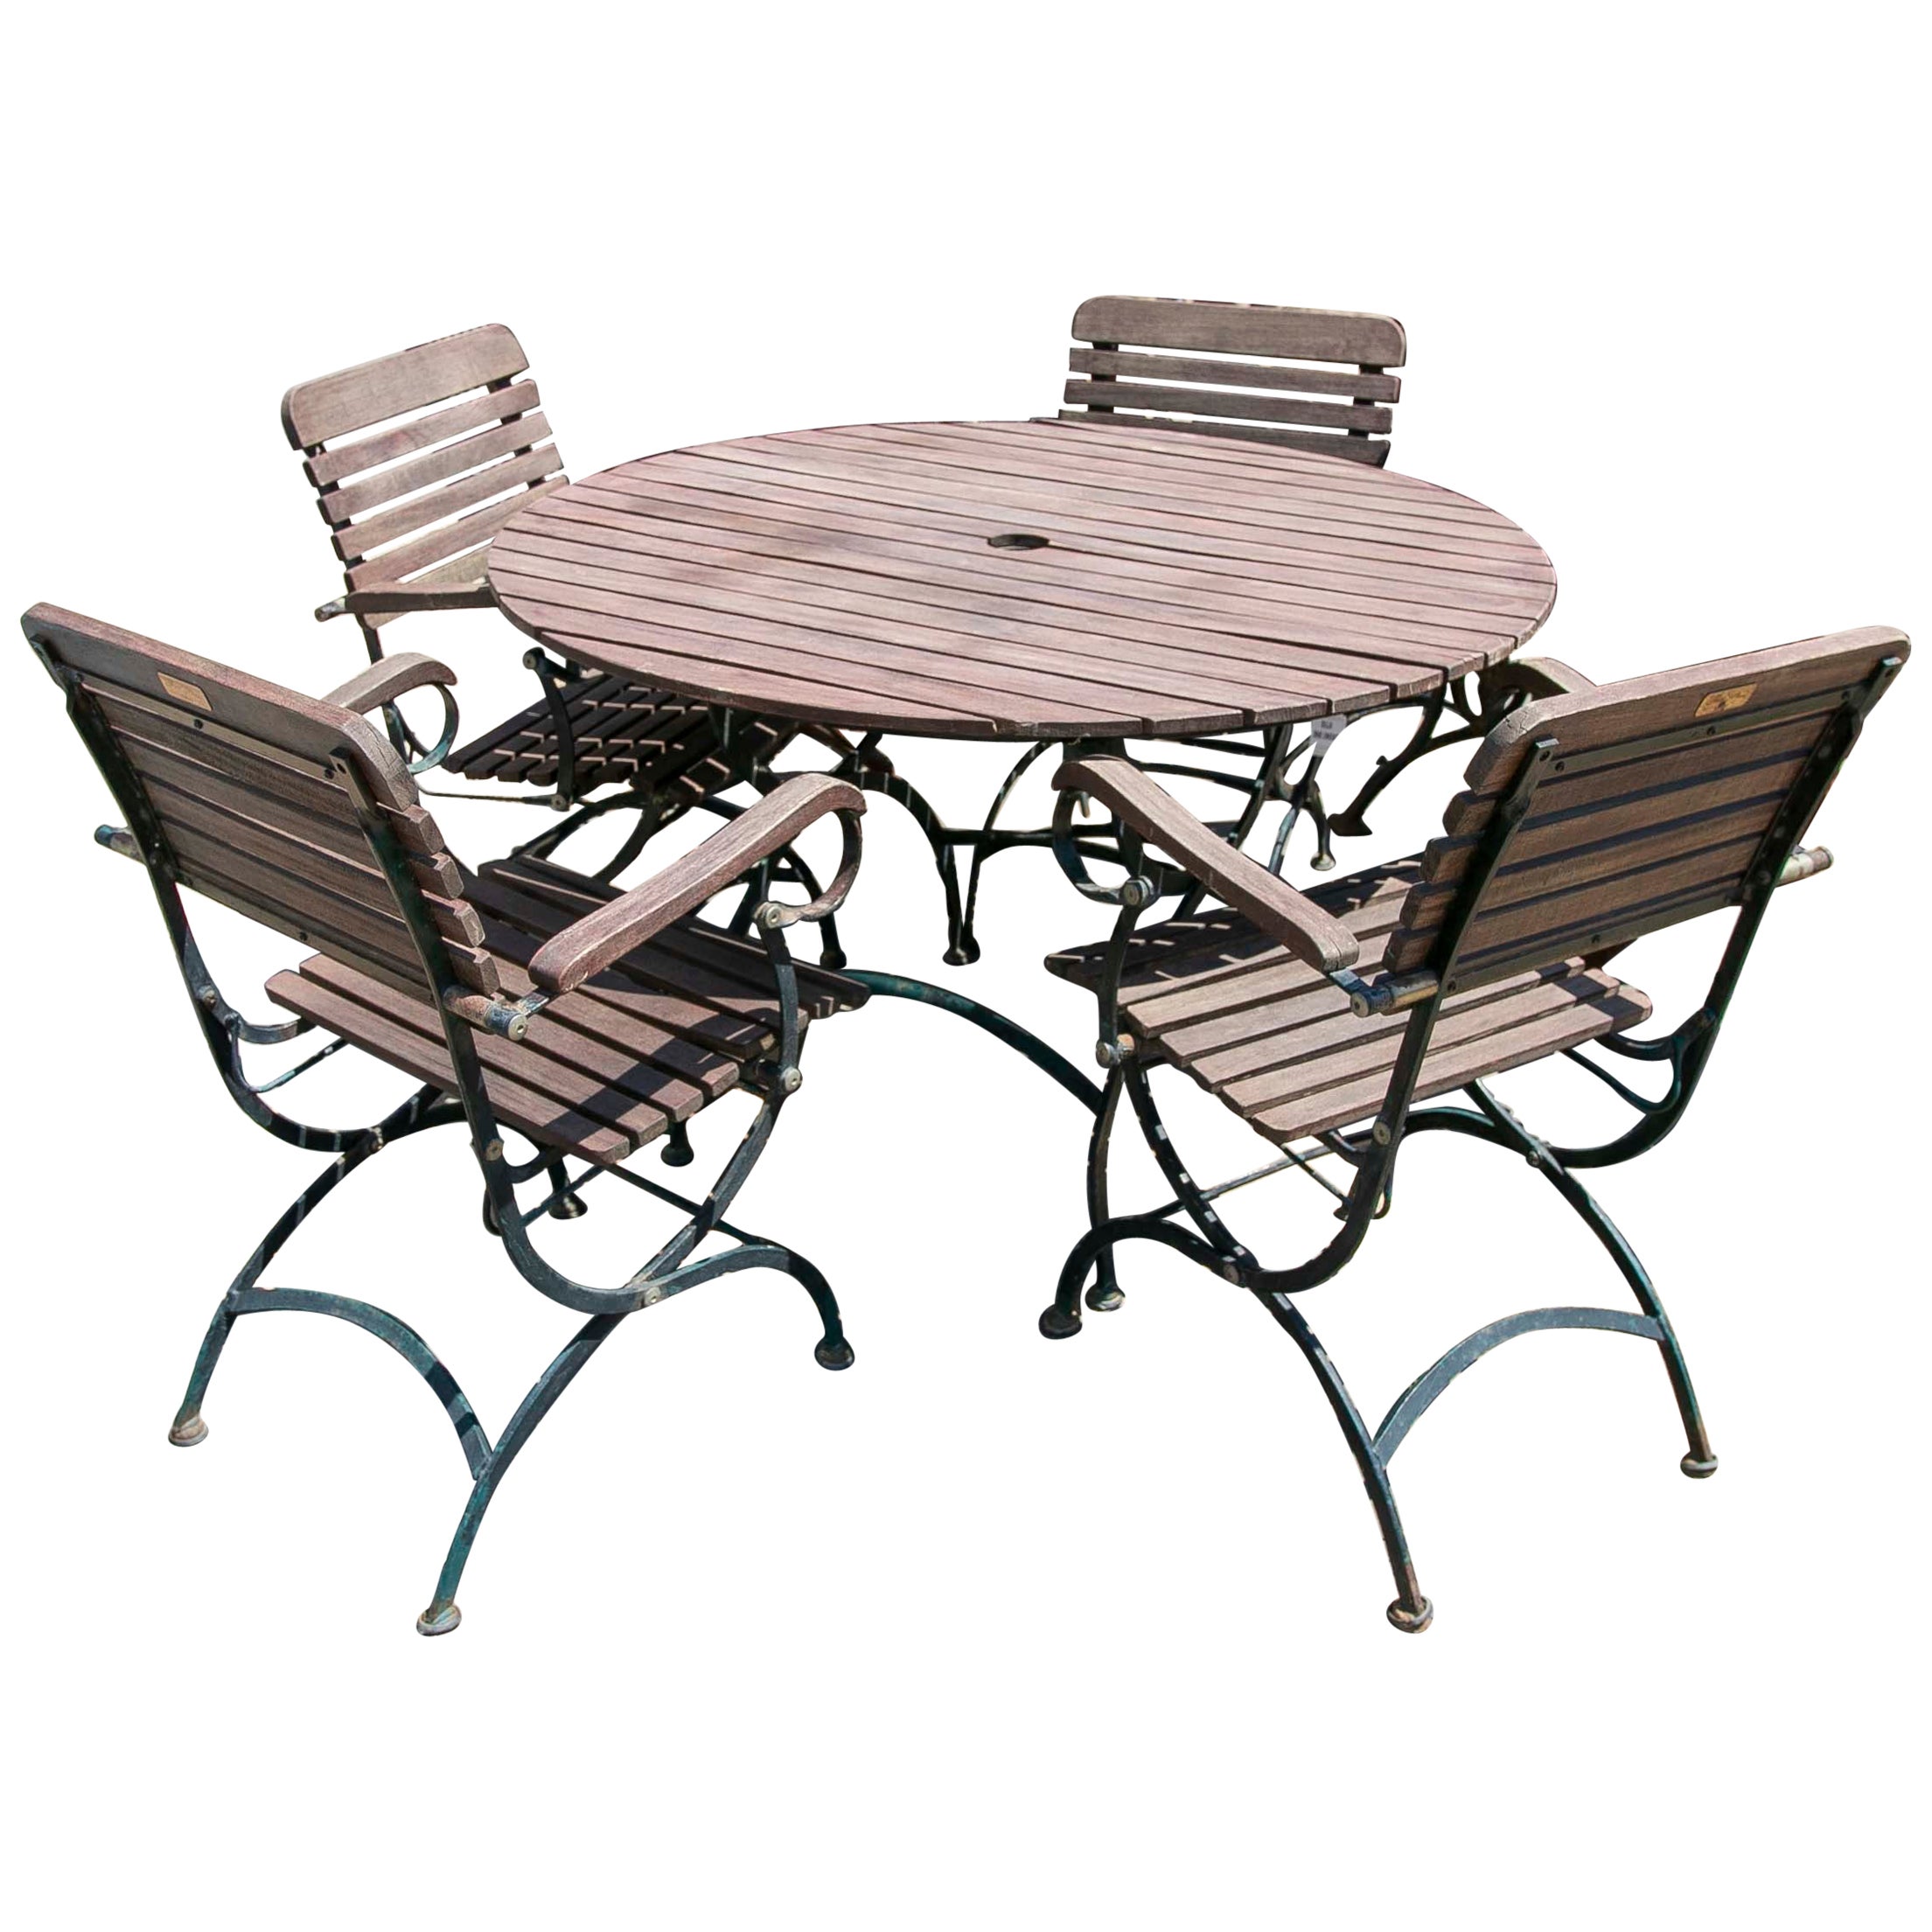 1980s Set Consisting of Table and Four Chairs in iron and wood